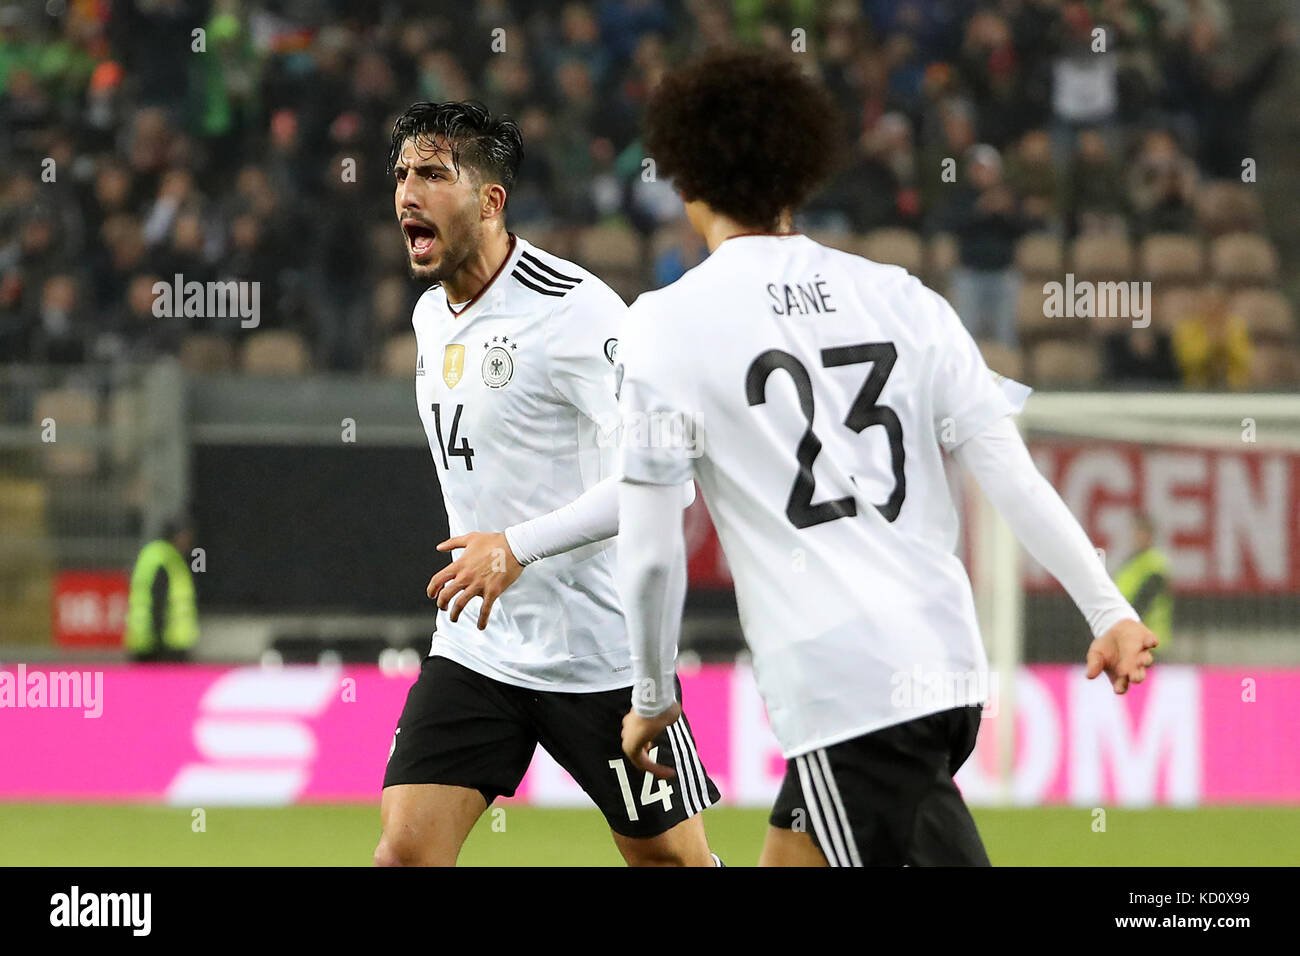 Kaiserslautern, Germany. 8th Oct, 2017. Emre Can (L) of Germany celebrates after scoring during the FIFA 2018 World Cup Qualifiers Group C match between Germany and Azerbaijan at Fritz Walter Stadium in Kaiserslautern, Germany, on Oct. 8, 2017. Germany won 5-1. Credit: Ulrich Hufnagel/Xinhua/Alamy Live News Stock Photo